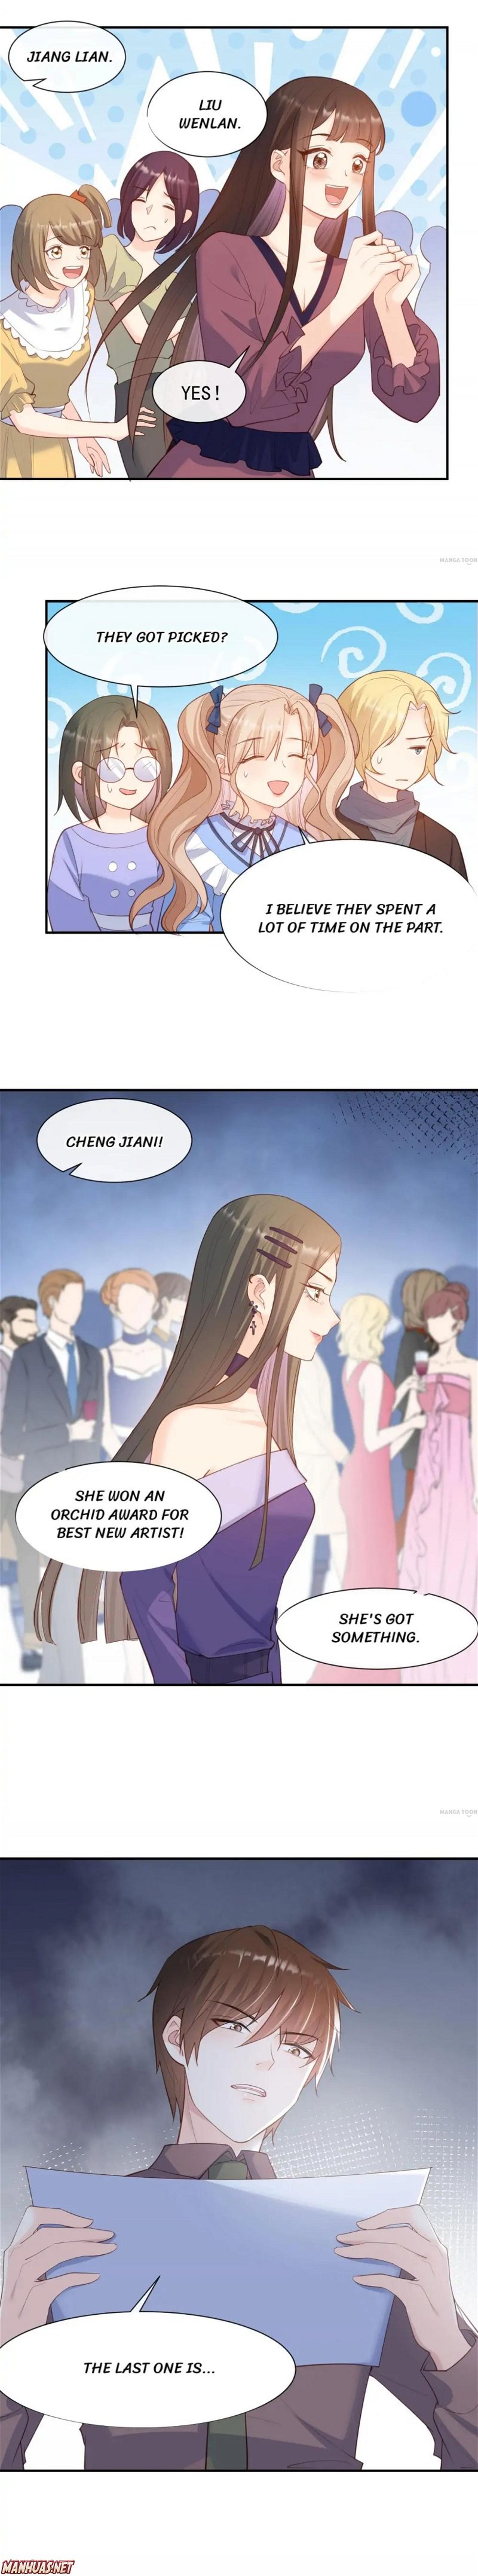 CEO’s Wife on Trending Topic Again Chapter 57 - Page 4